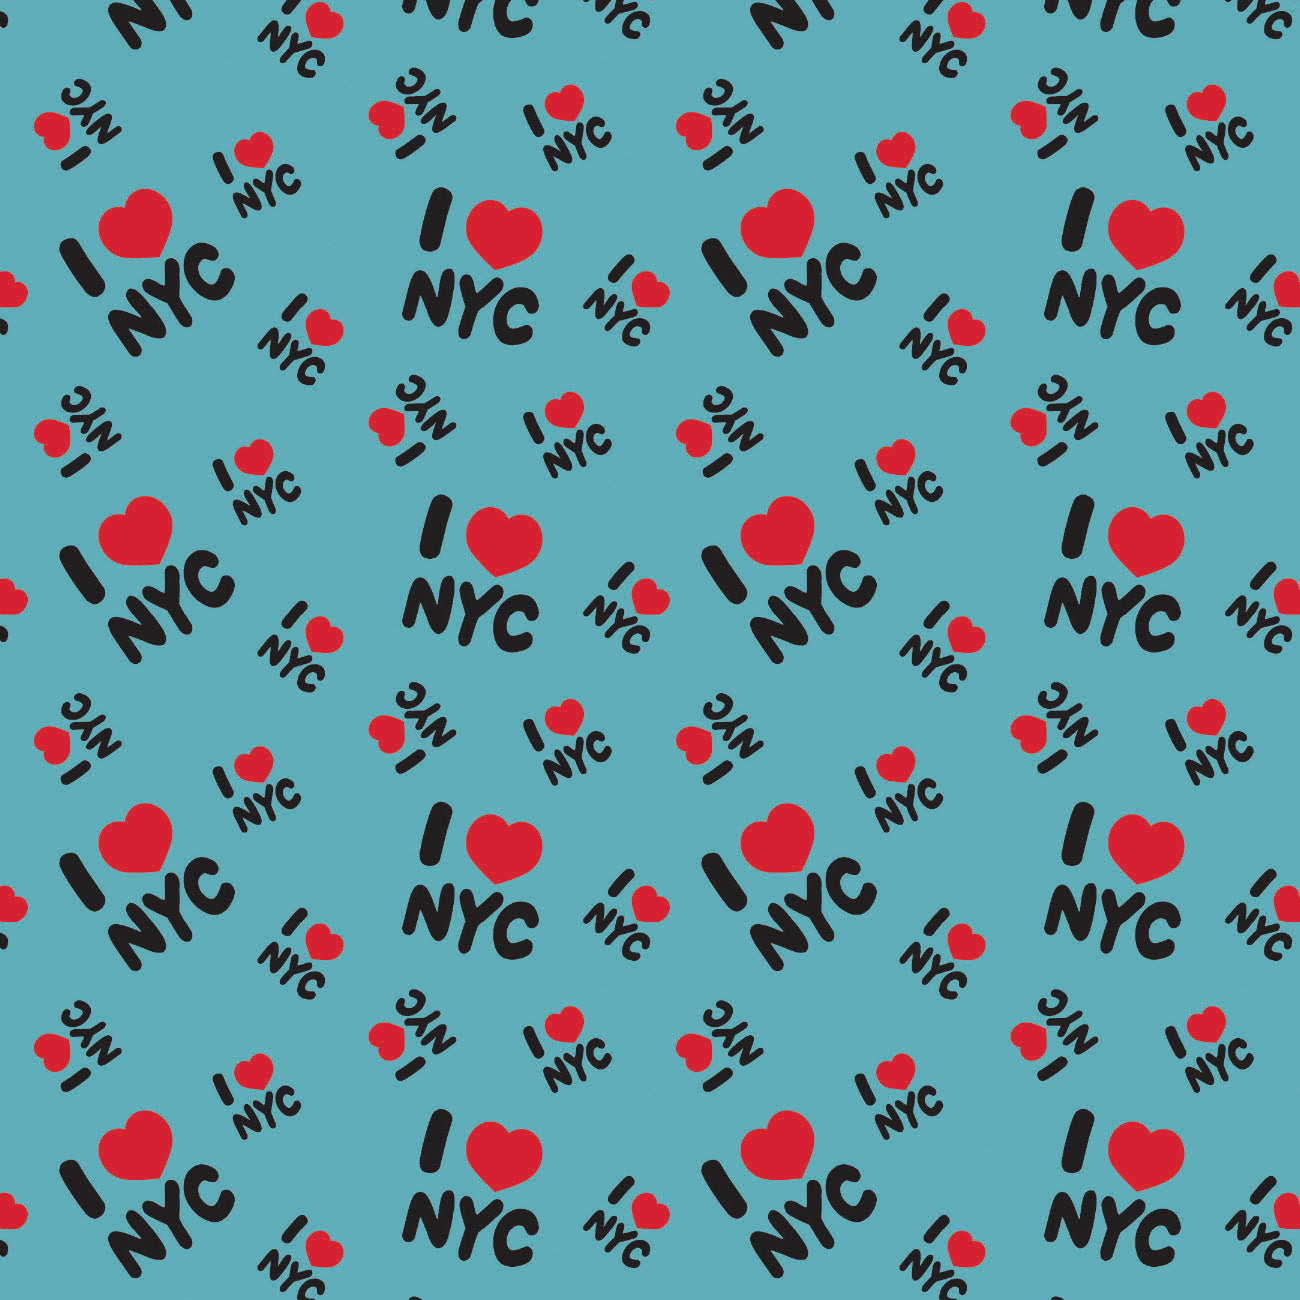 In a NY Minute Collection - I Heart NYC - Blue - Cotton 21220604-03